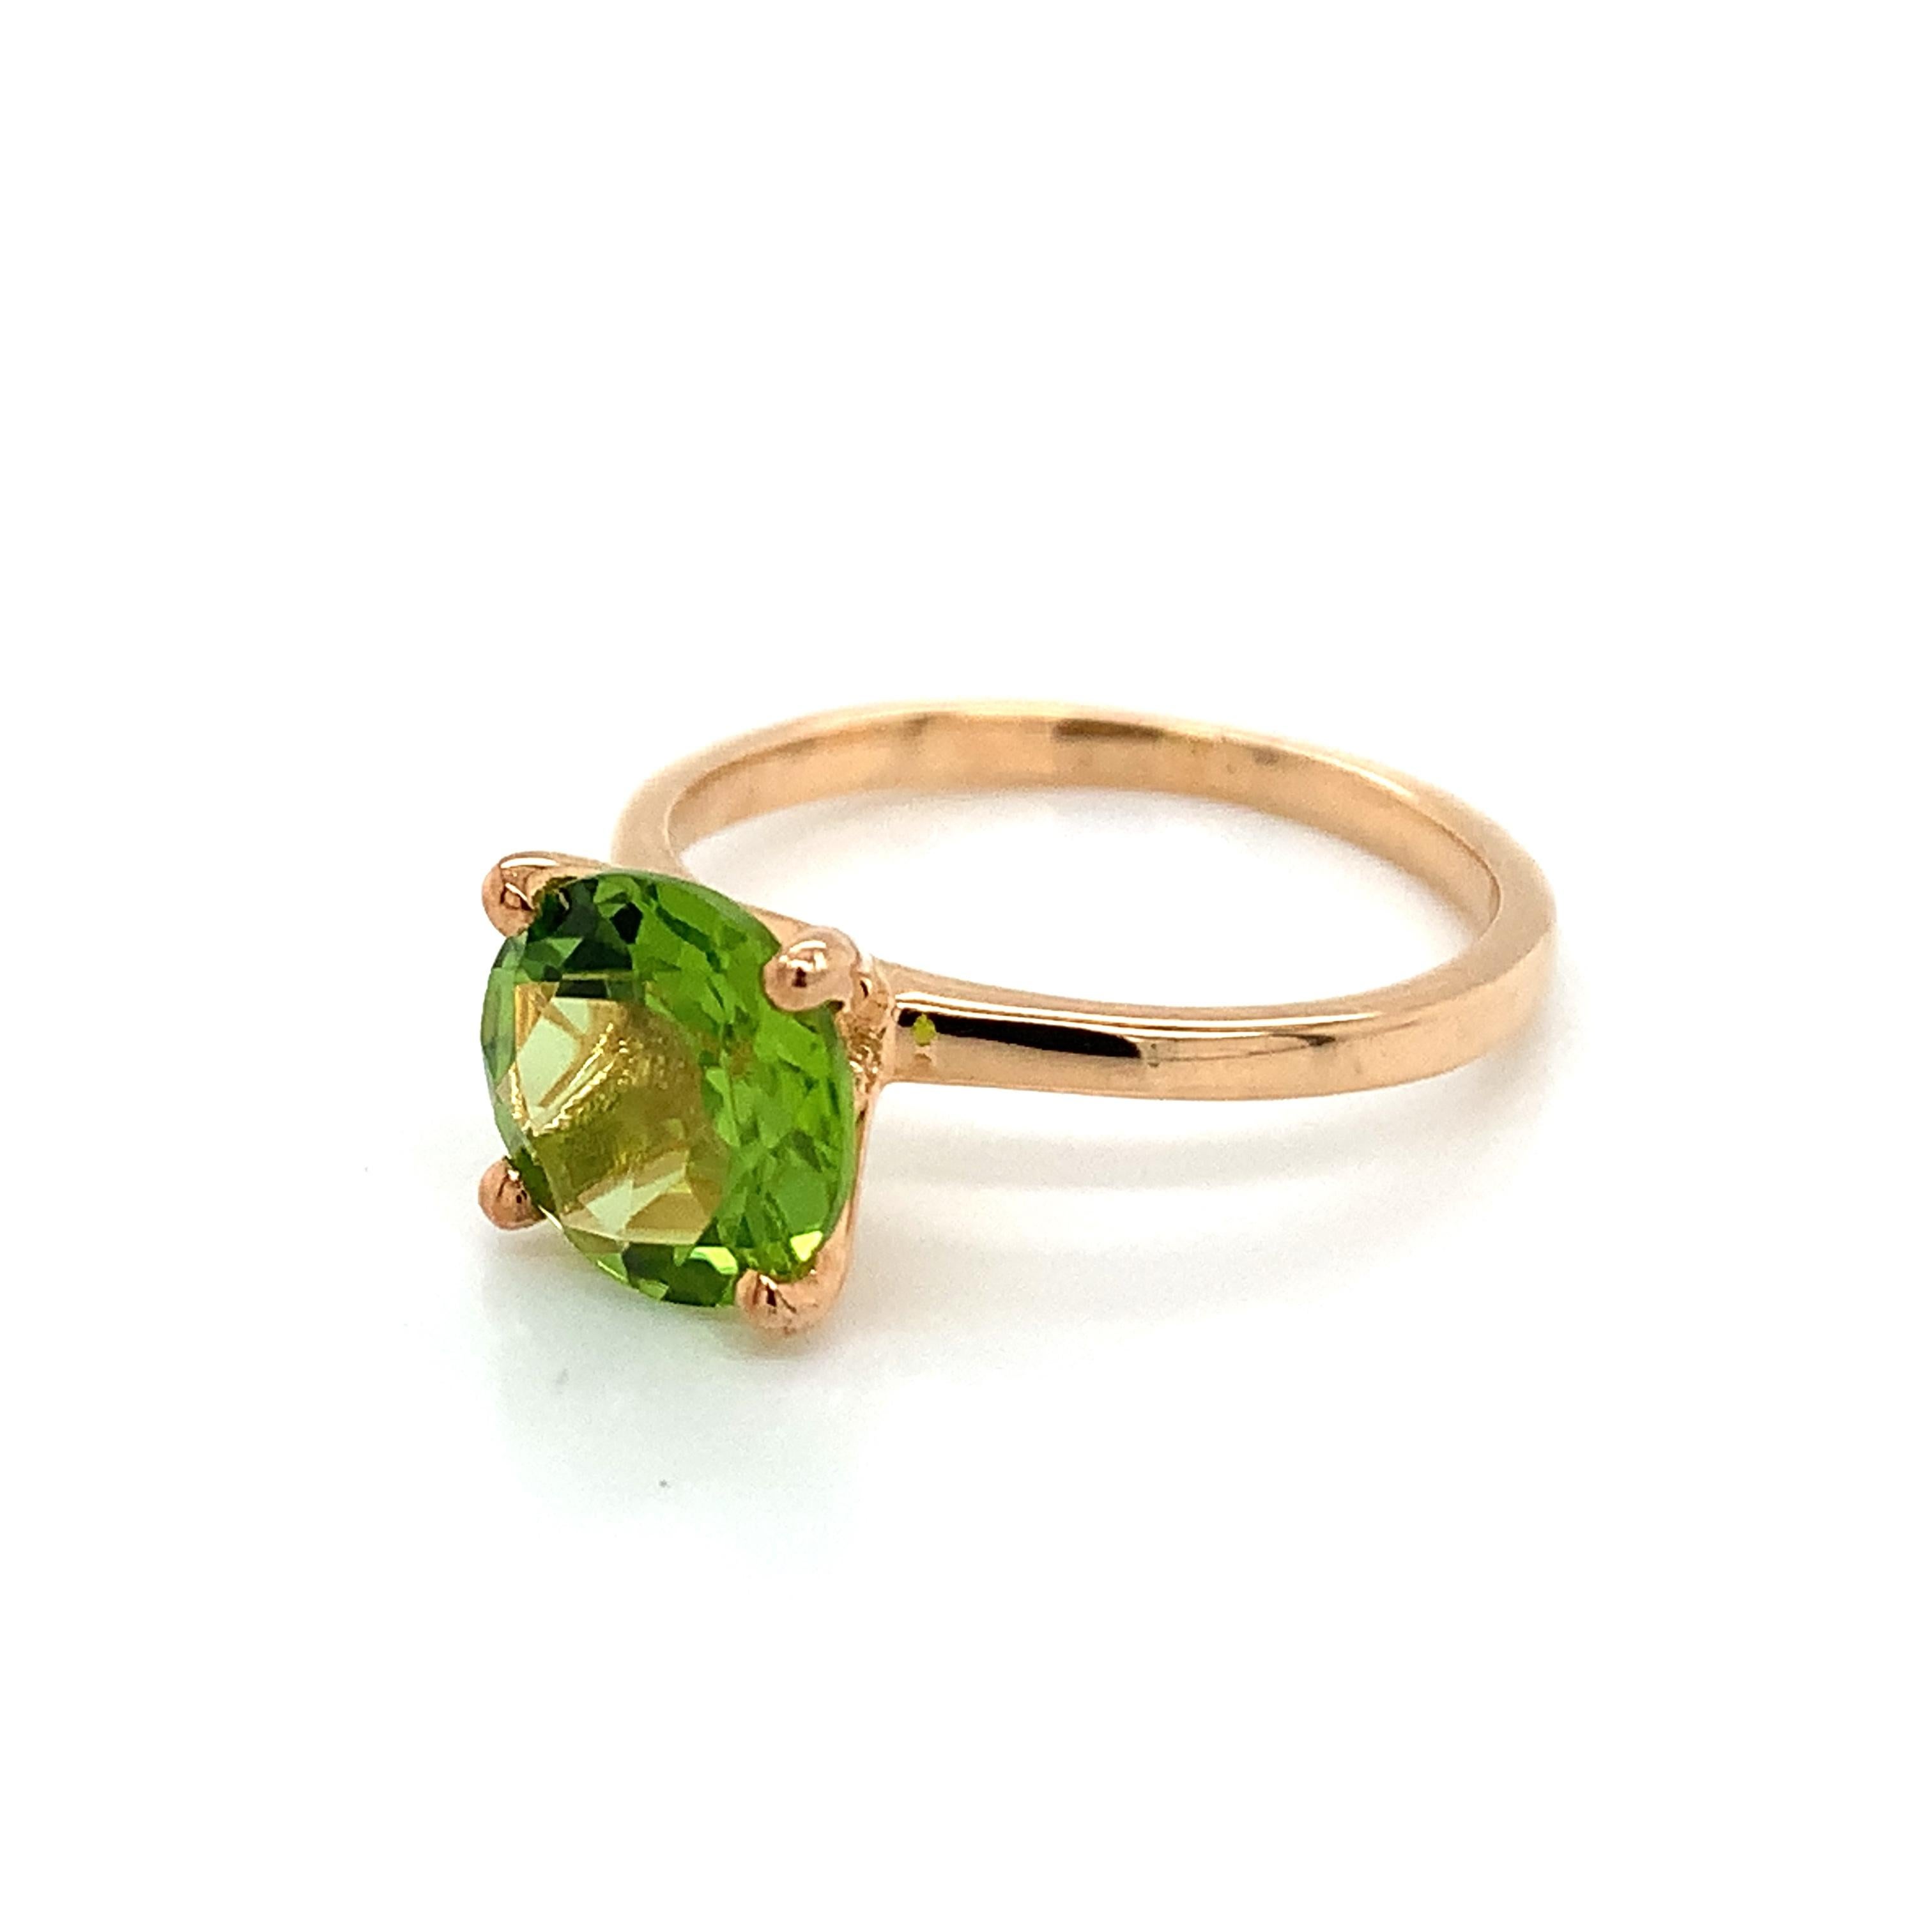 Round Shape Peridot Gemstone beautifully crafted in a Ring. A fiery Green Color August Birthstone. For a special occasion like Engagement or Proposal or may be as a gift for a special person.

Primary Stone Size - 8x8mm